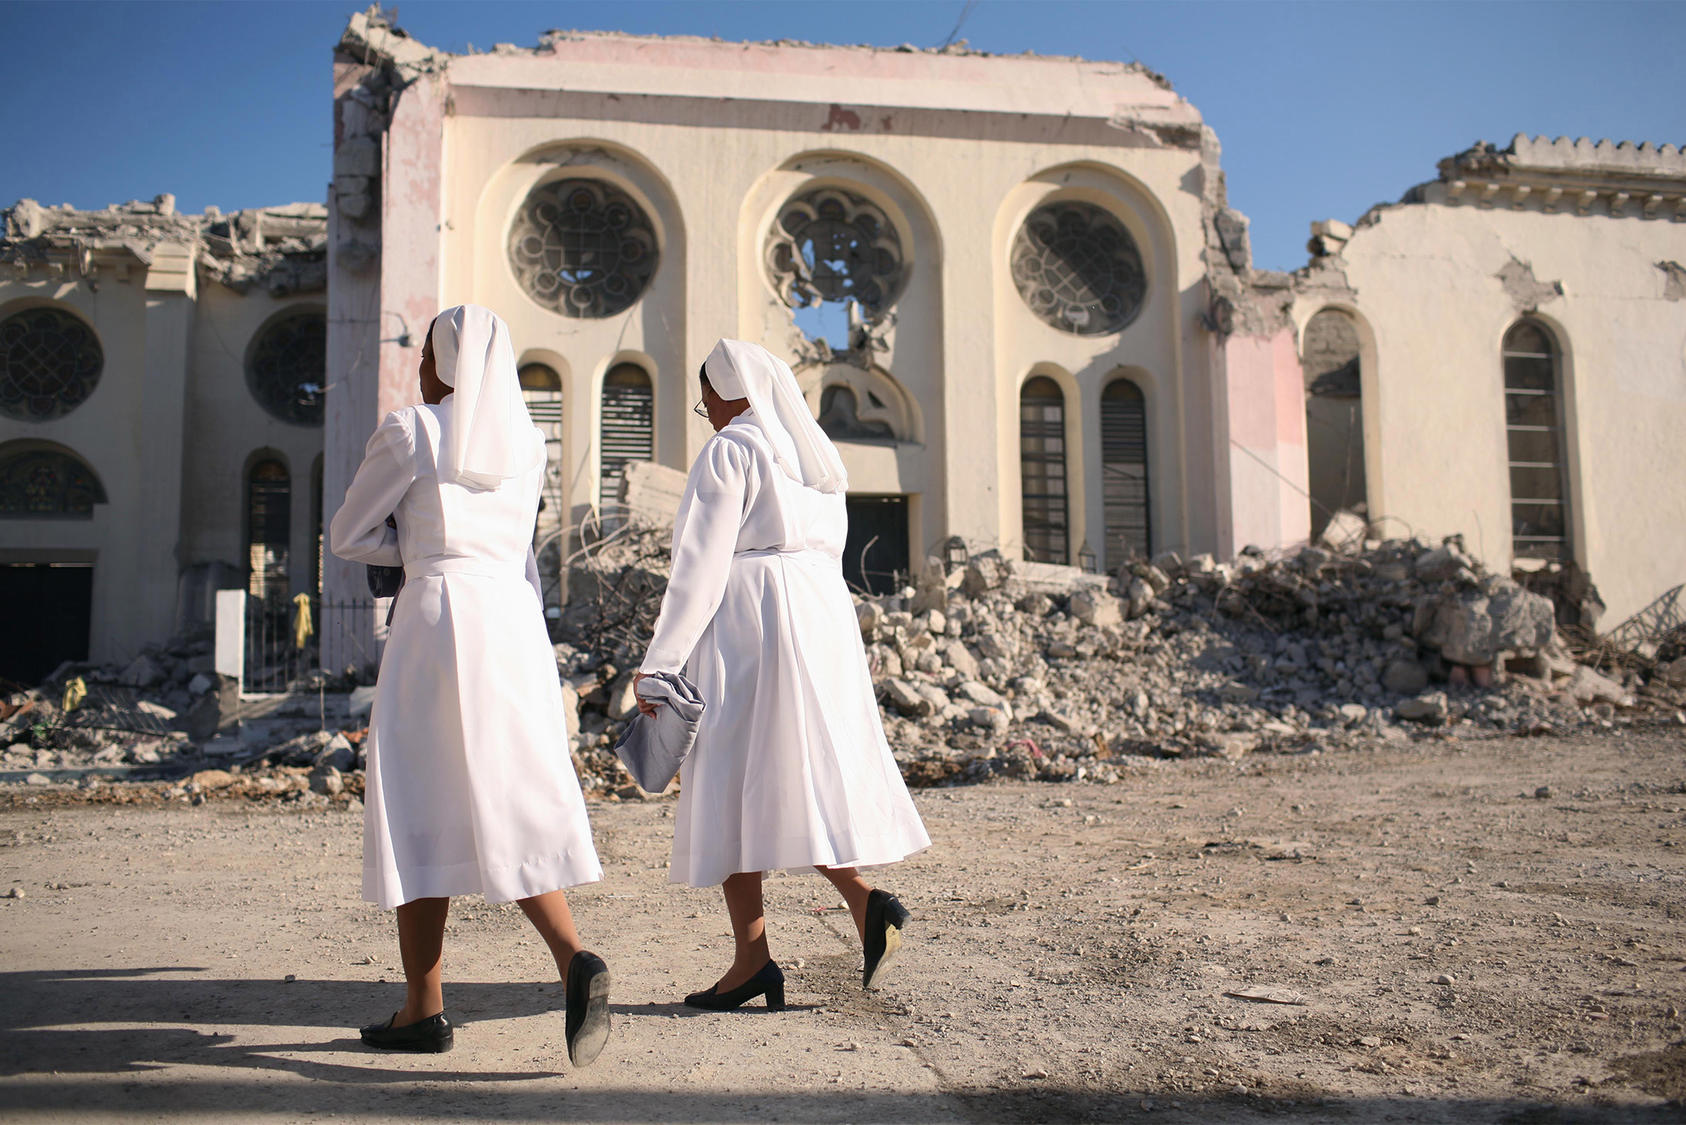 Nuns walk past the ruins of the national cathedral after an earthquake in Port-au-Prince, Haiti. Saturday, January 23, 2010. (Michael Appleton/The New York Times)